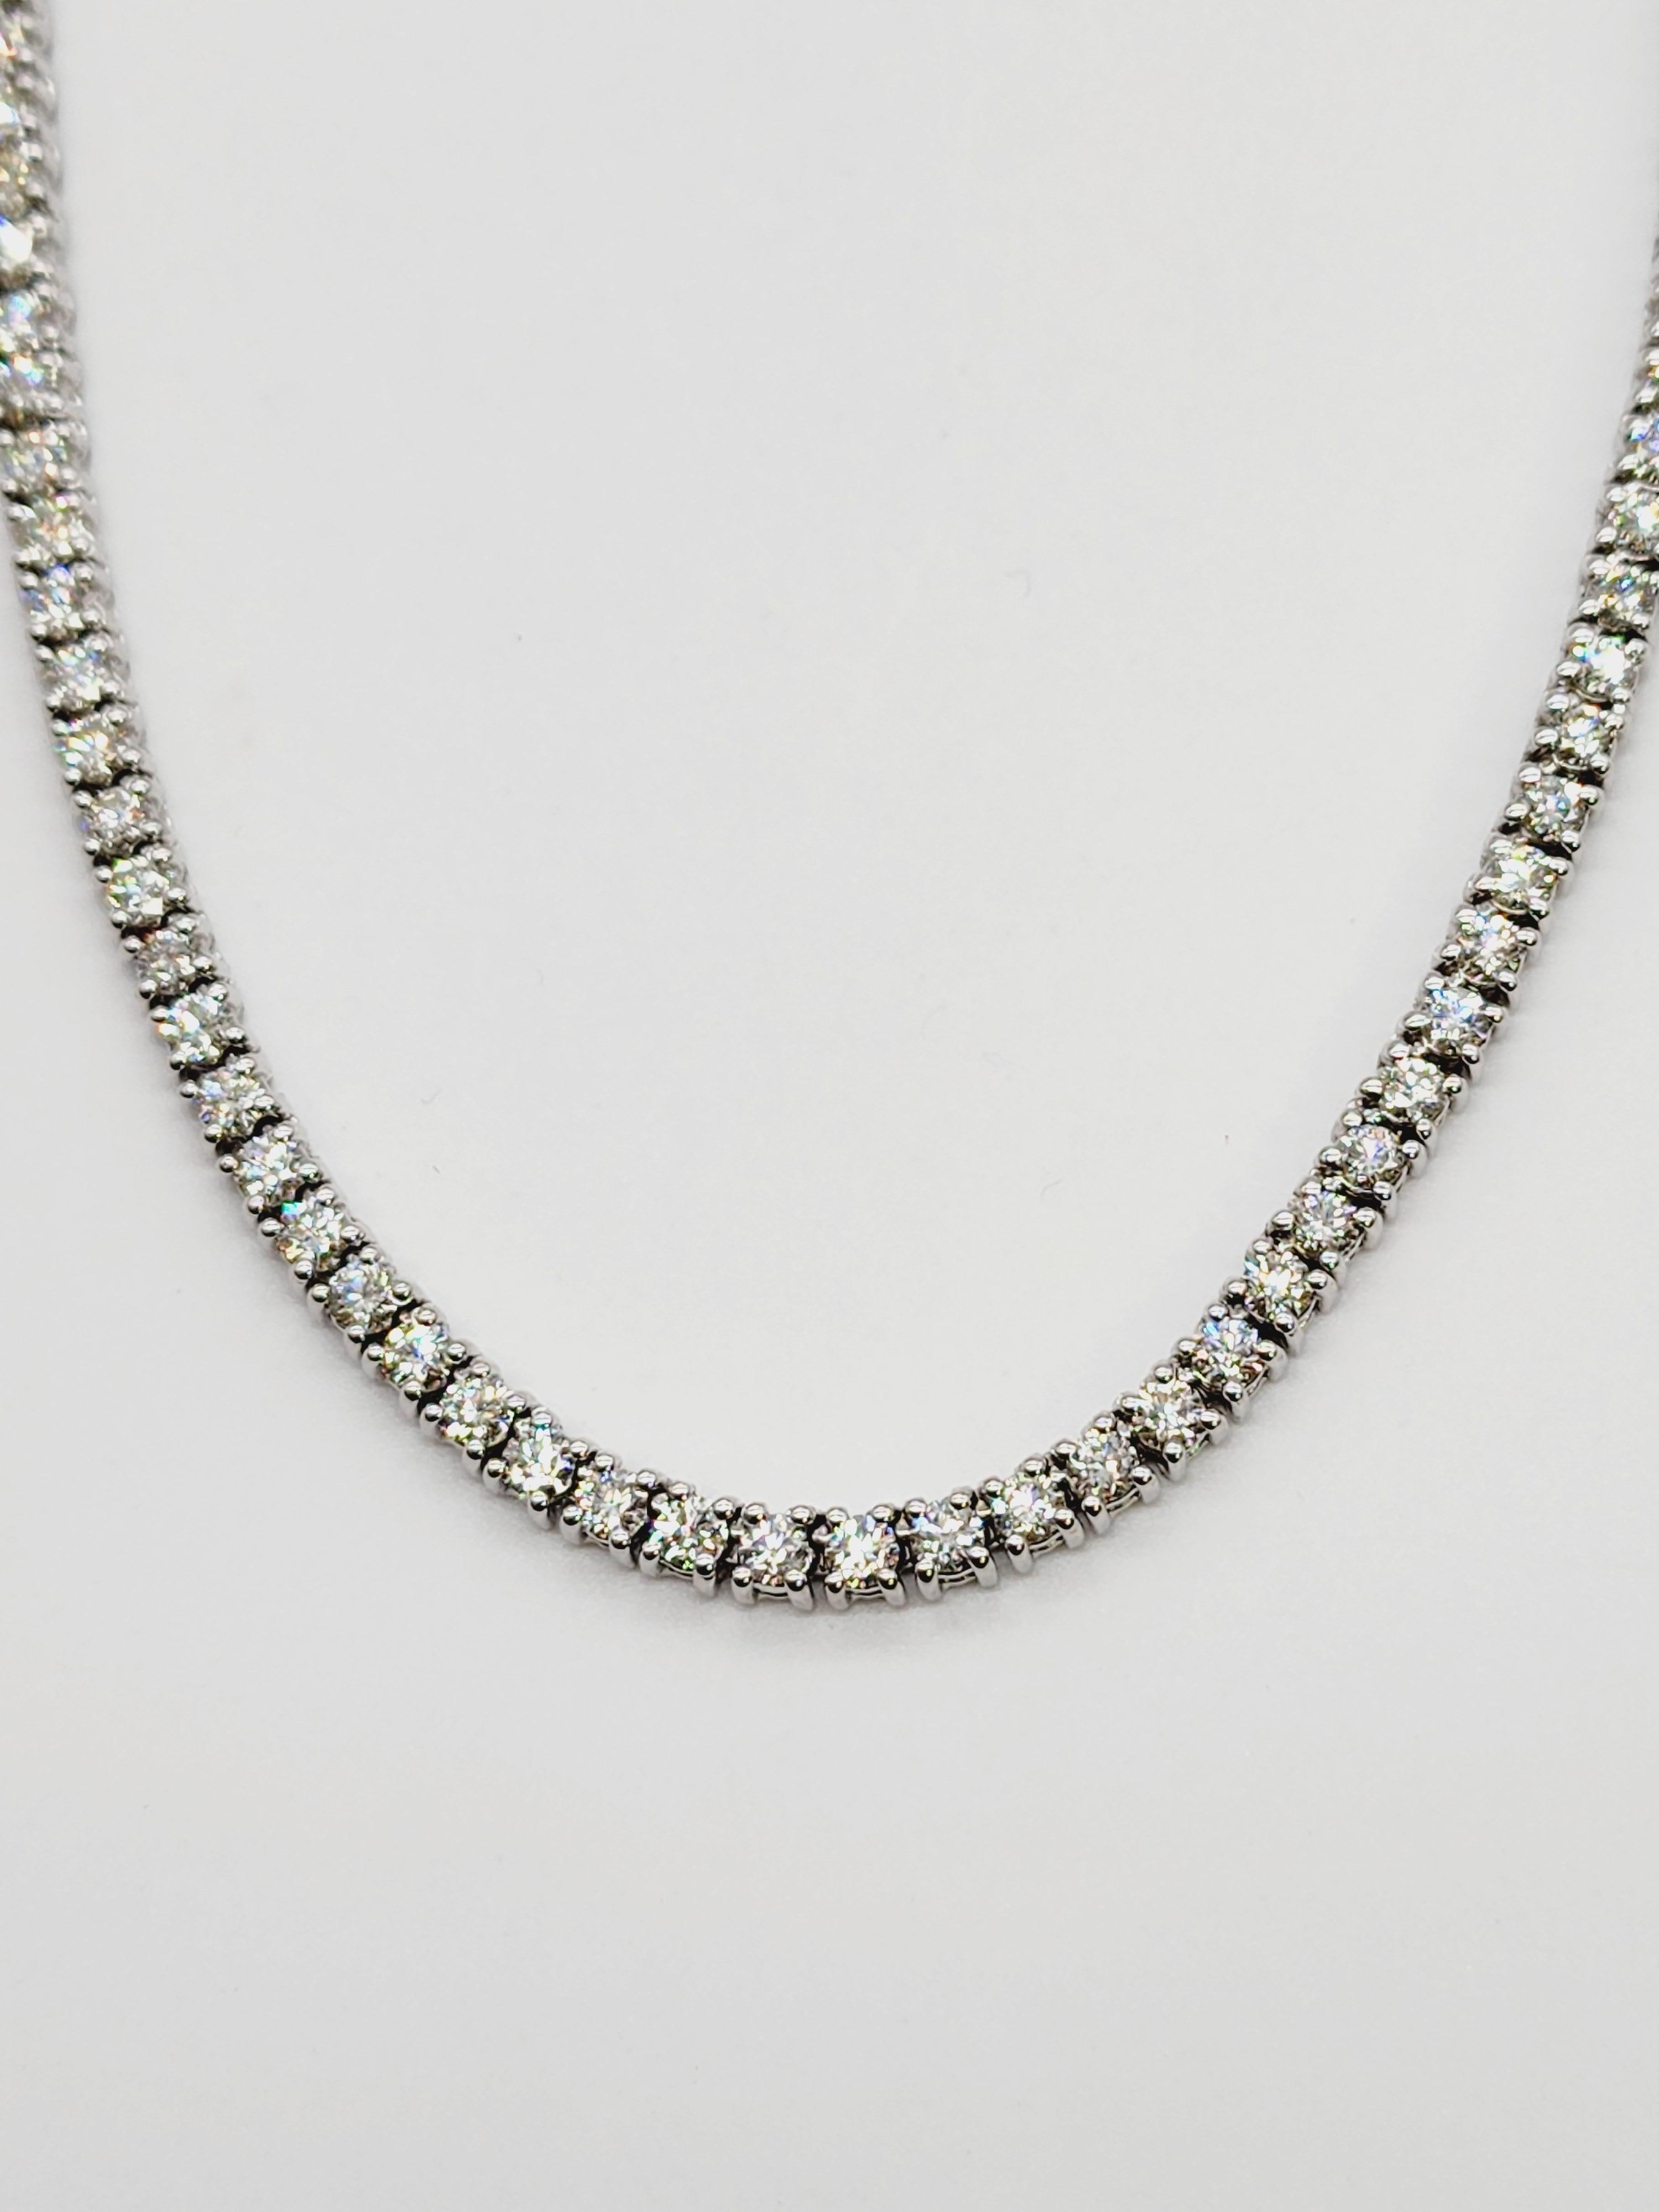 5.80 Carats Mini Diamond Tennis Necklace Chain 14 Karat White Gold 18'' In New Condition For Sale In Great Neck, NY